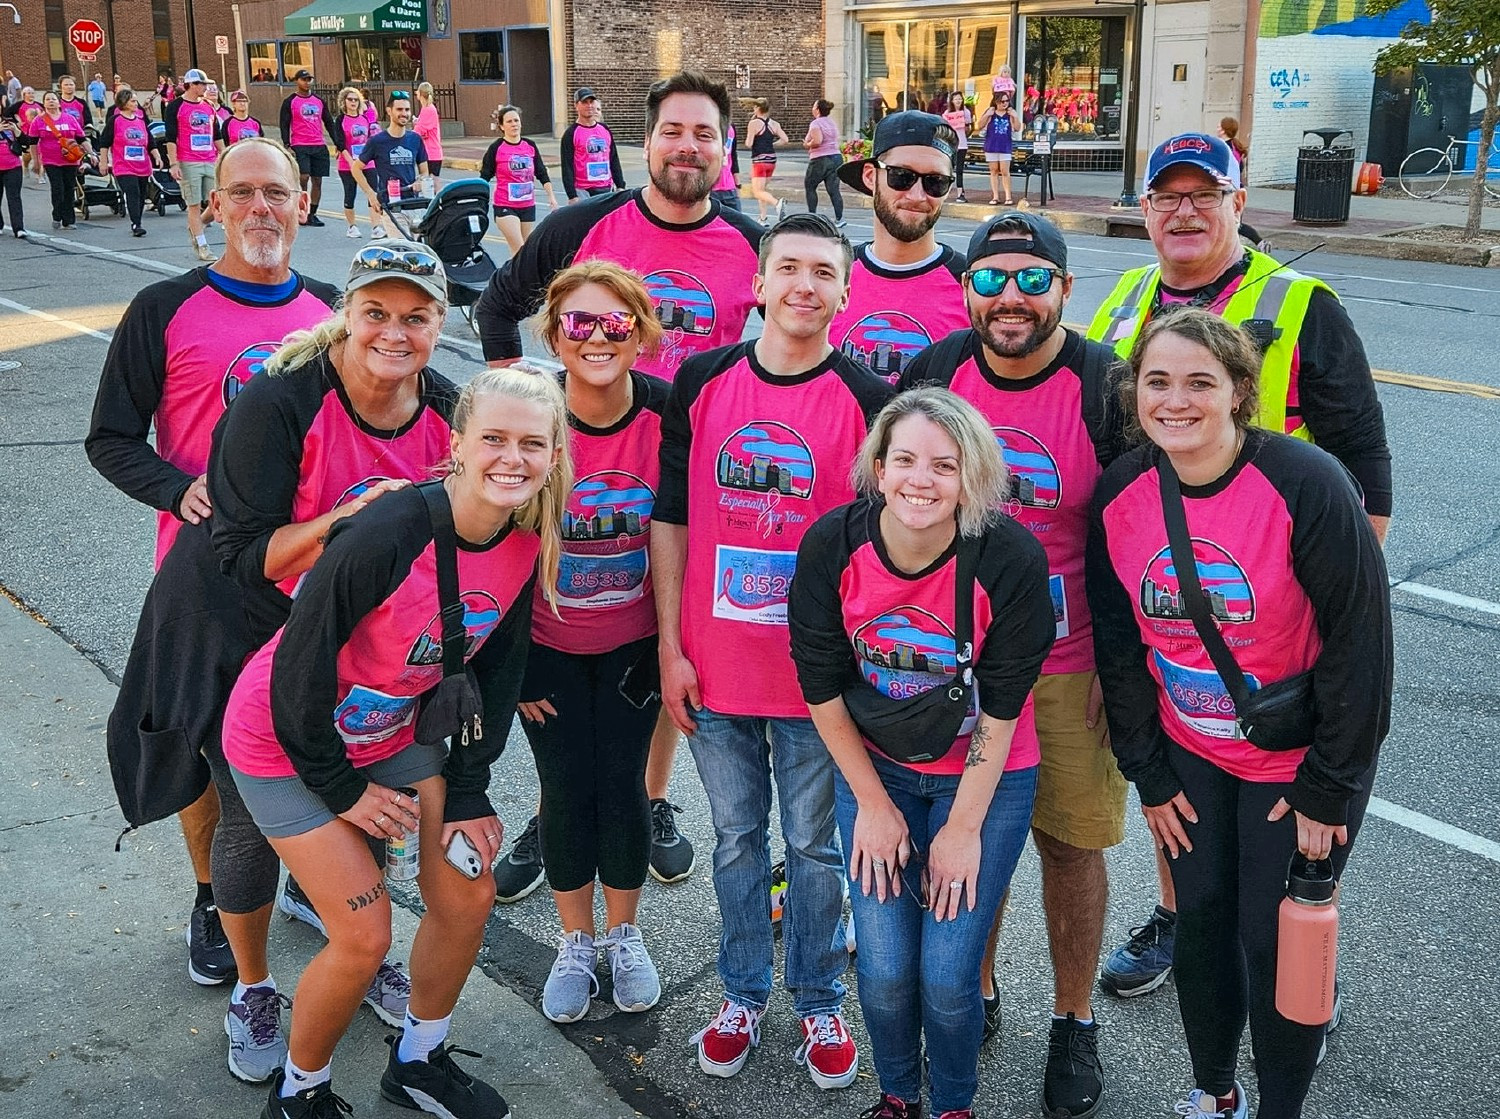 Team Members participating in local race for Breast Cancer research.